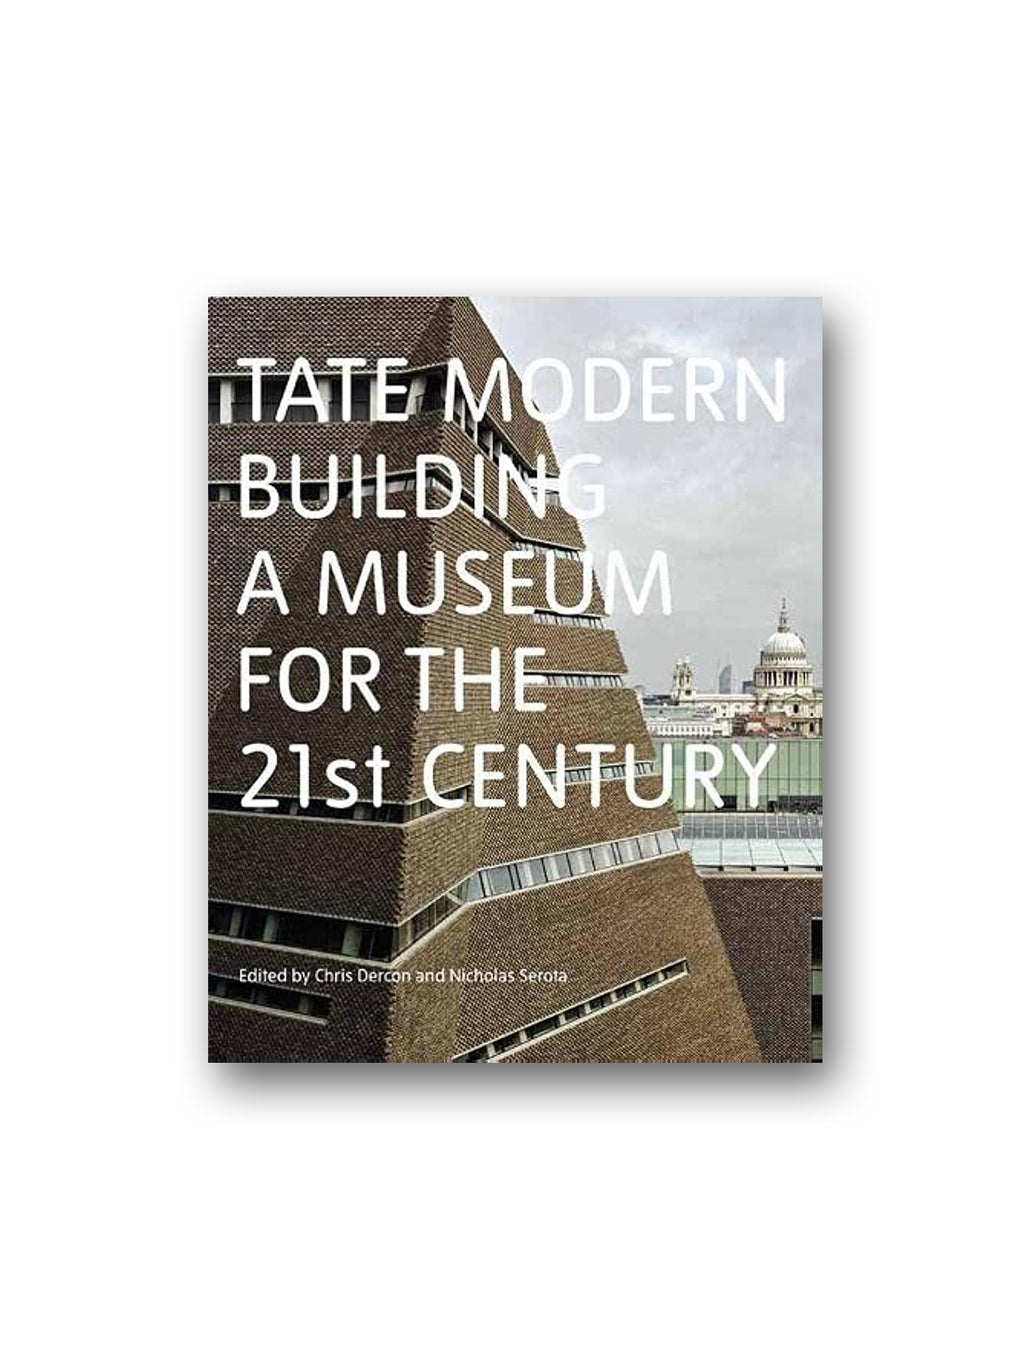 Tate Modern: Building a Museum for 21st Century